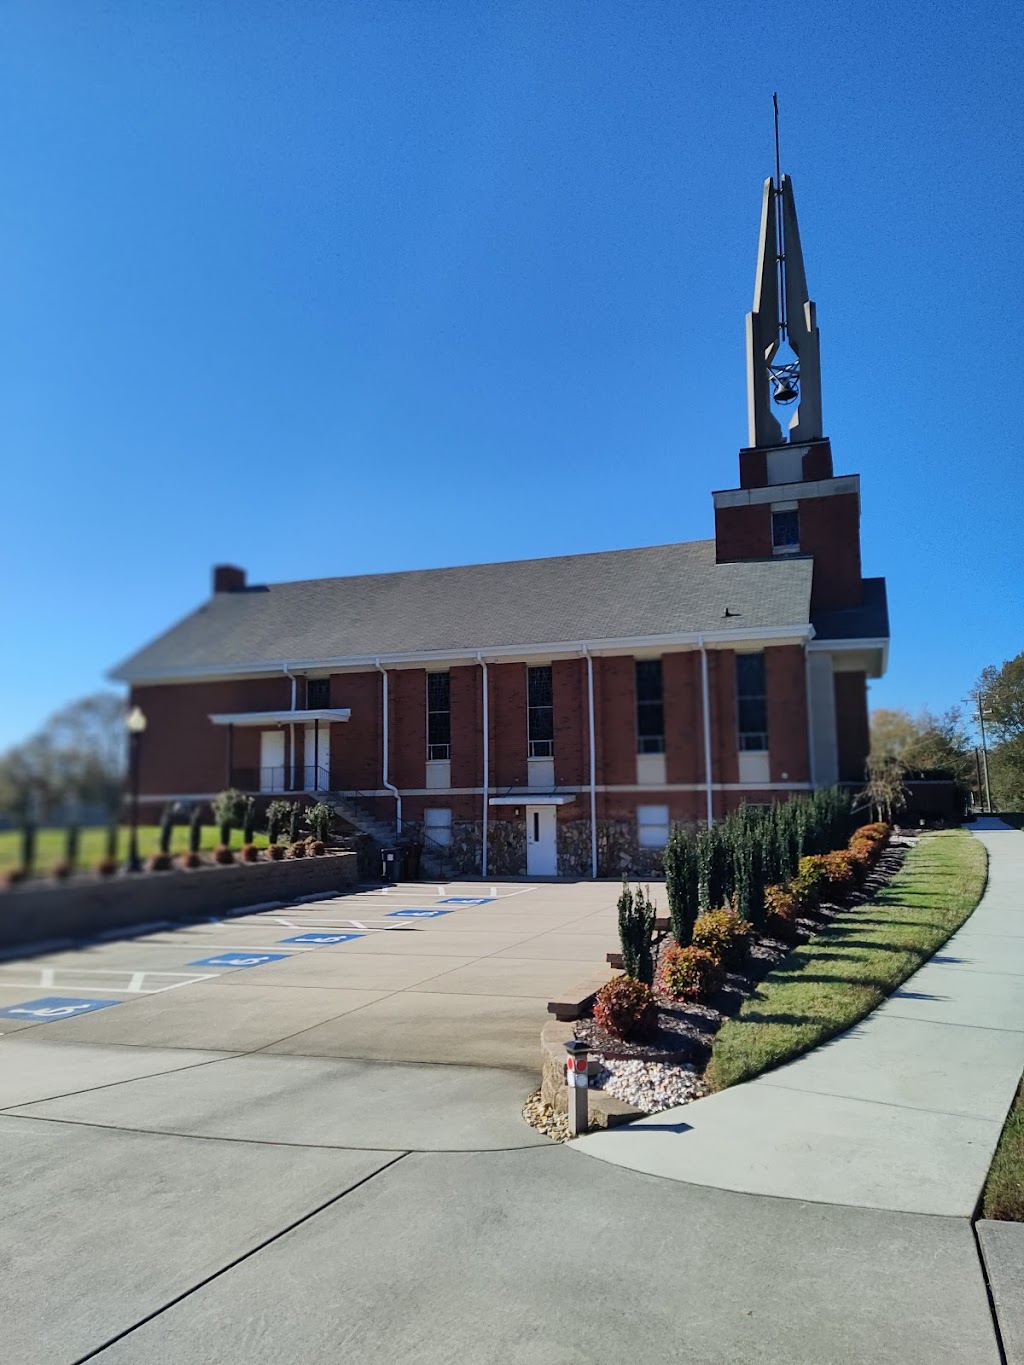 Stokesdale Christian Church | 8607 Stokesdale St, Stokesdale, NC 27357, USA | Phone: (336) 643-3111